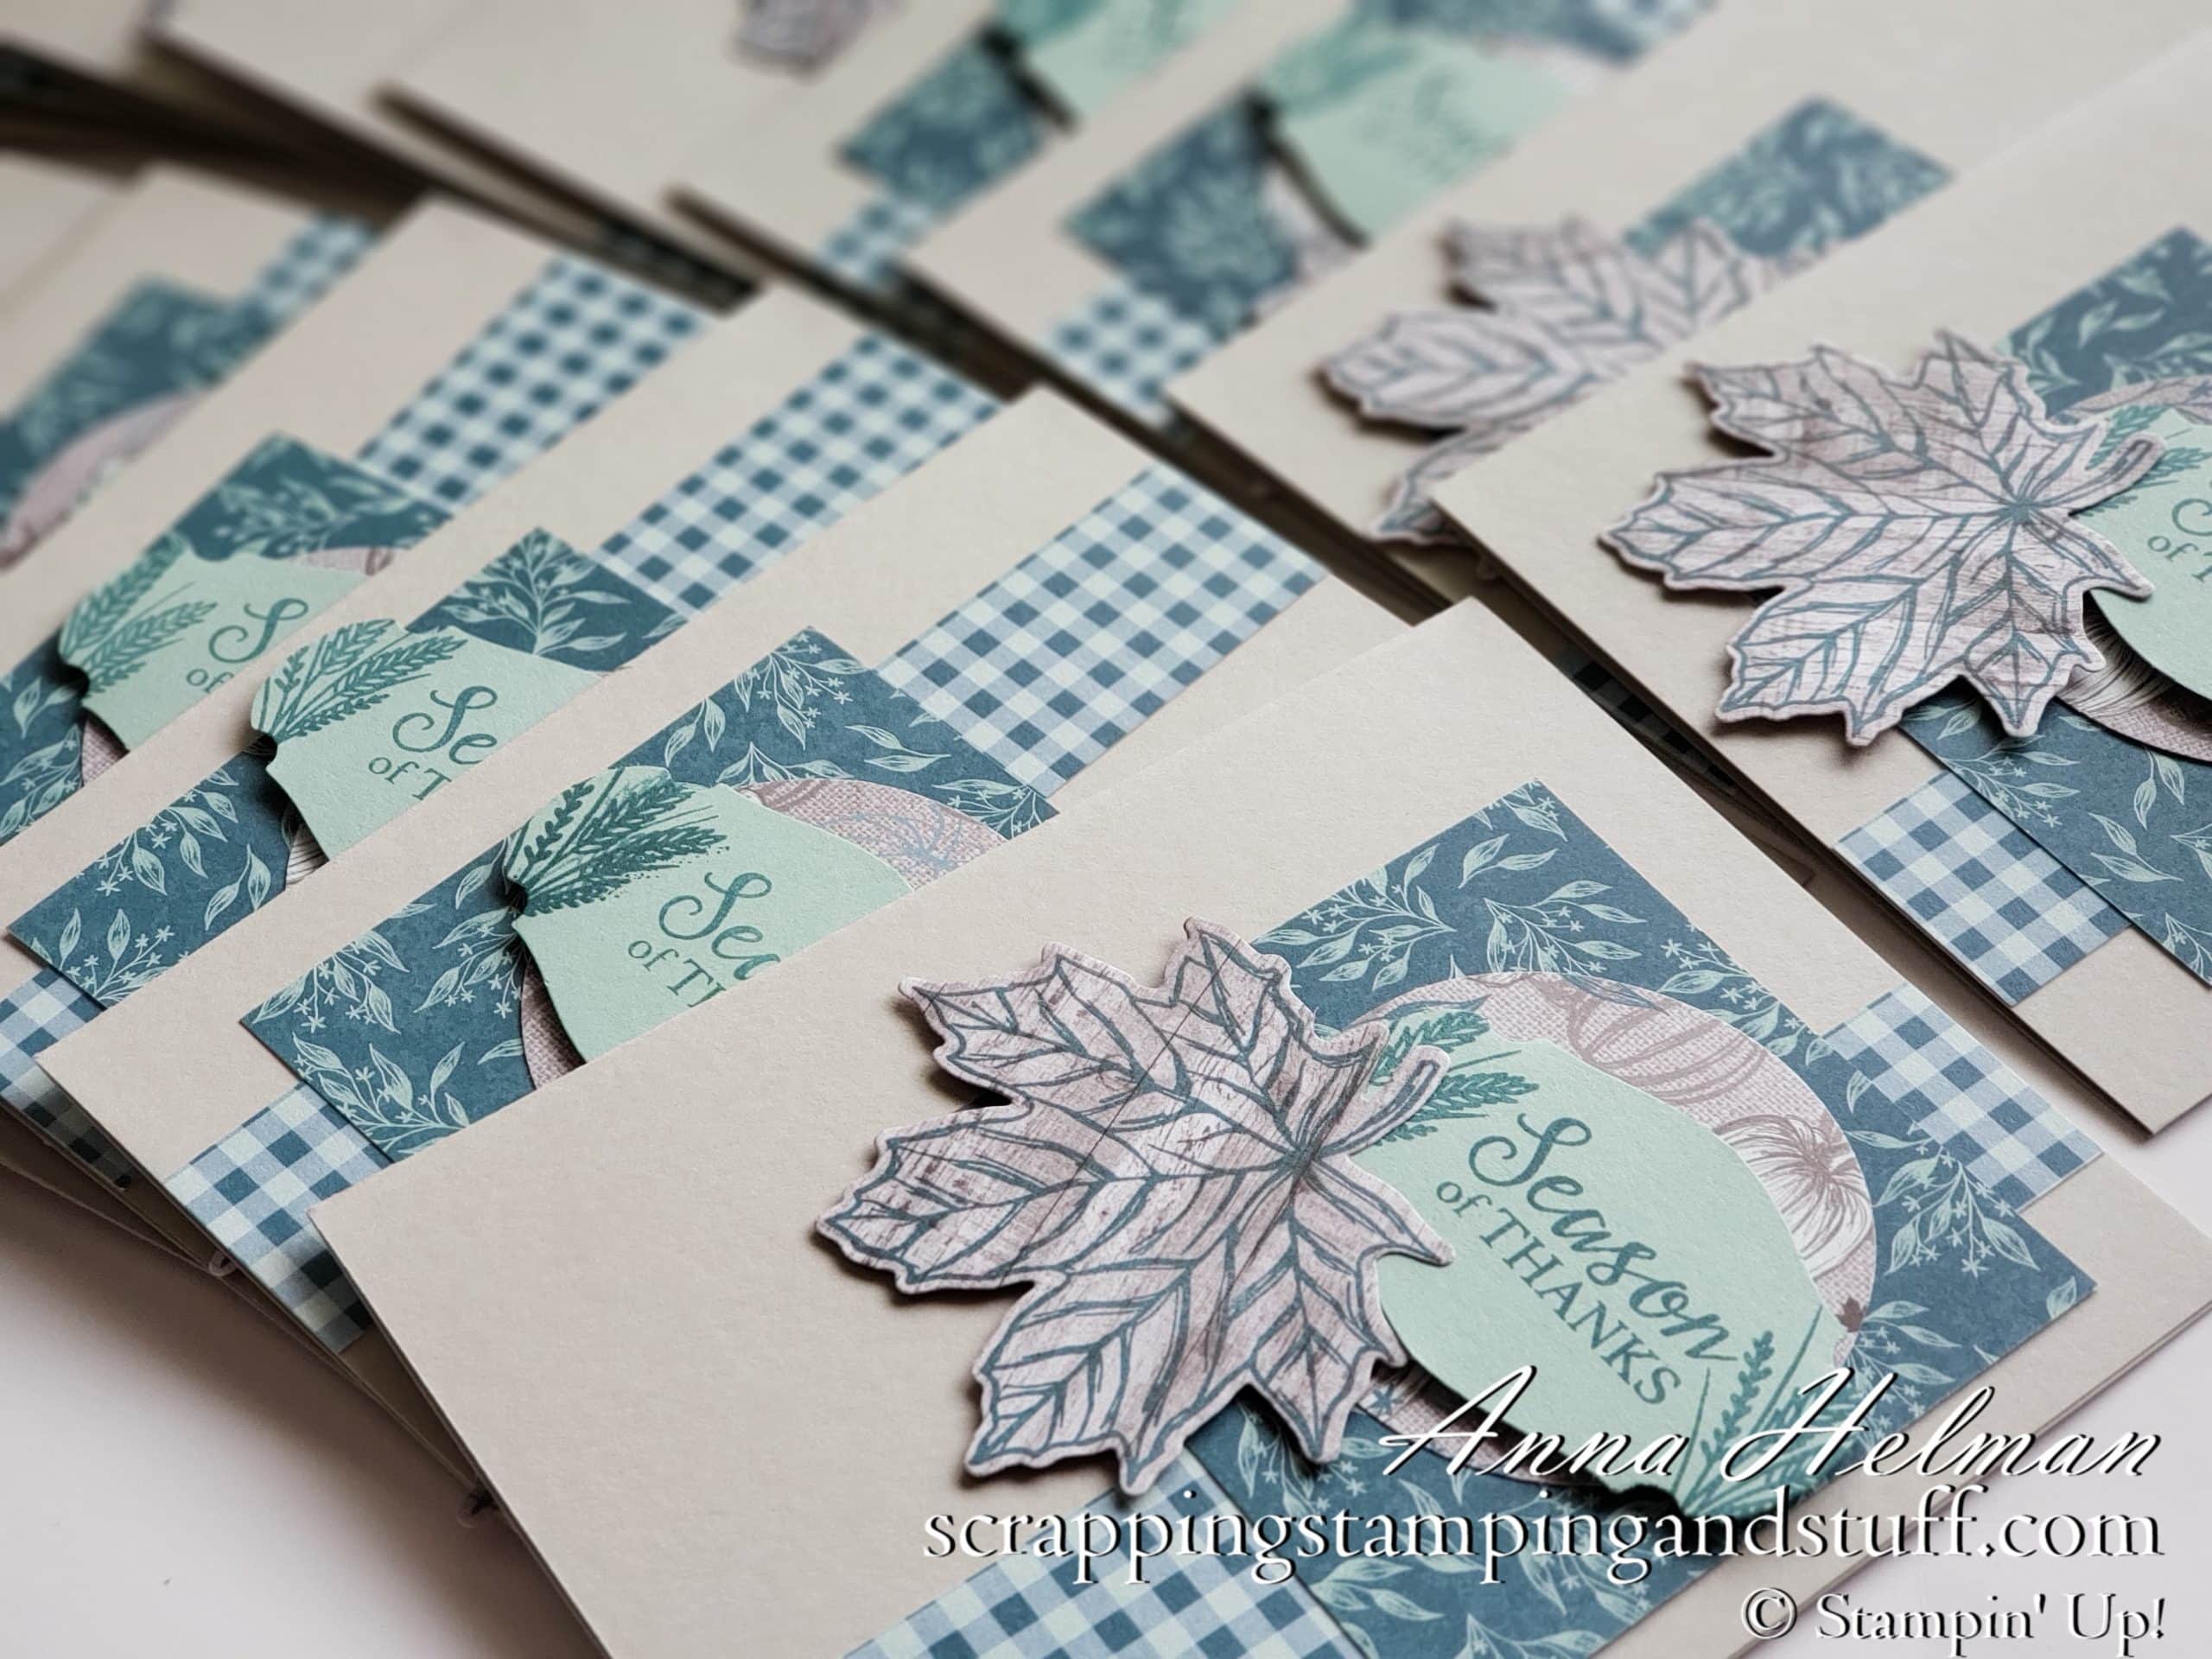 Neat card made with this leaves stamp and die set! Stampin Up Gather Together stamp set and Gathered Leaves Dies